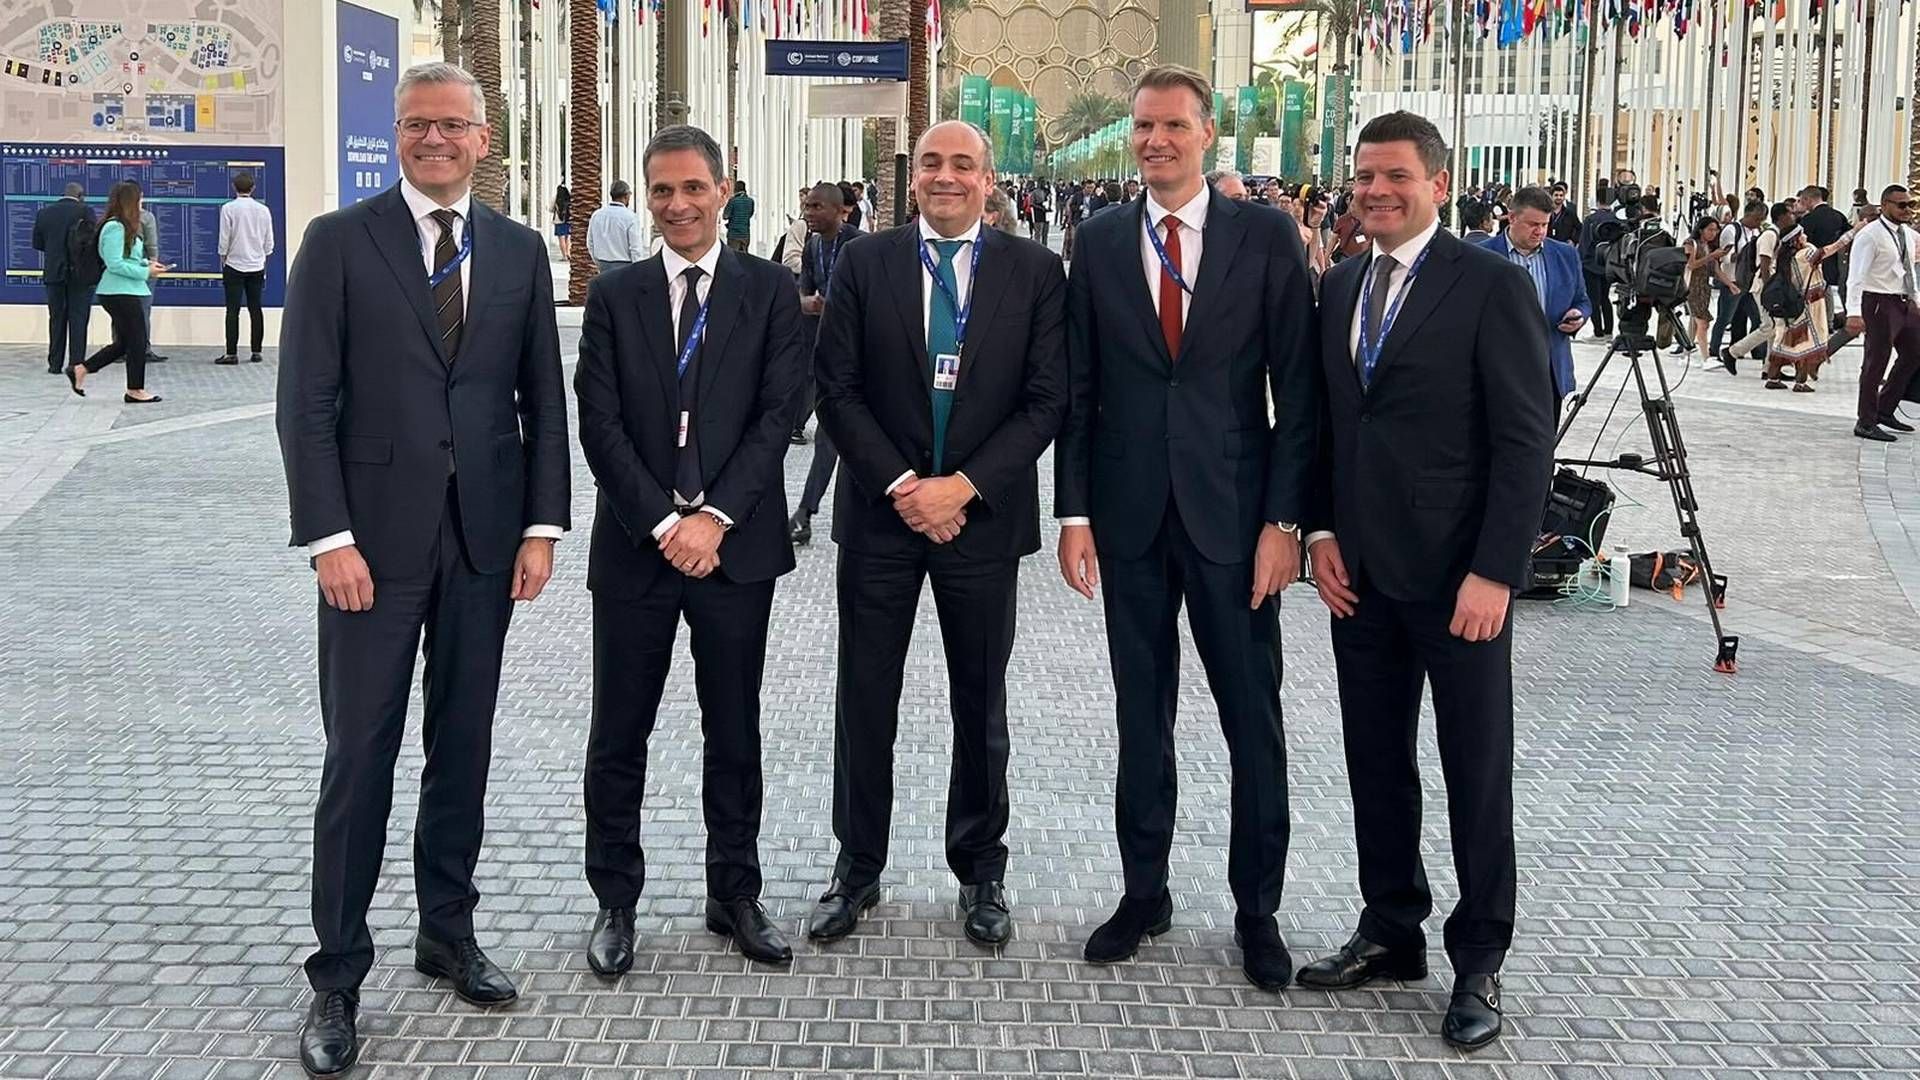 Expectations for this year's COP 28 meeting were high as plans to fulfill the Paris Agreement were laid out. Pictured here are chief executives from MSC, Maersk, CMA CGM, Hapag-Lloyd and Wallenius Willhelmsen, who have called for an end date for fossil fuel newbuildings. | Photo: Pr/mærsk.